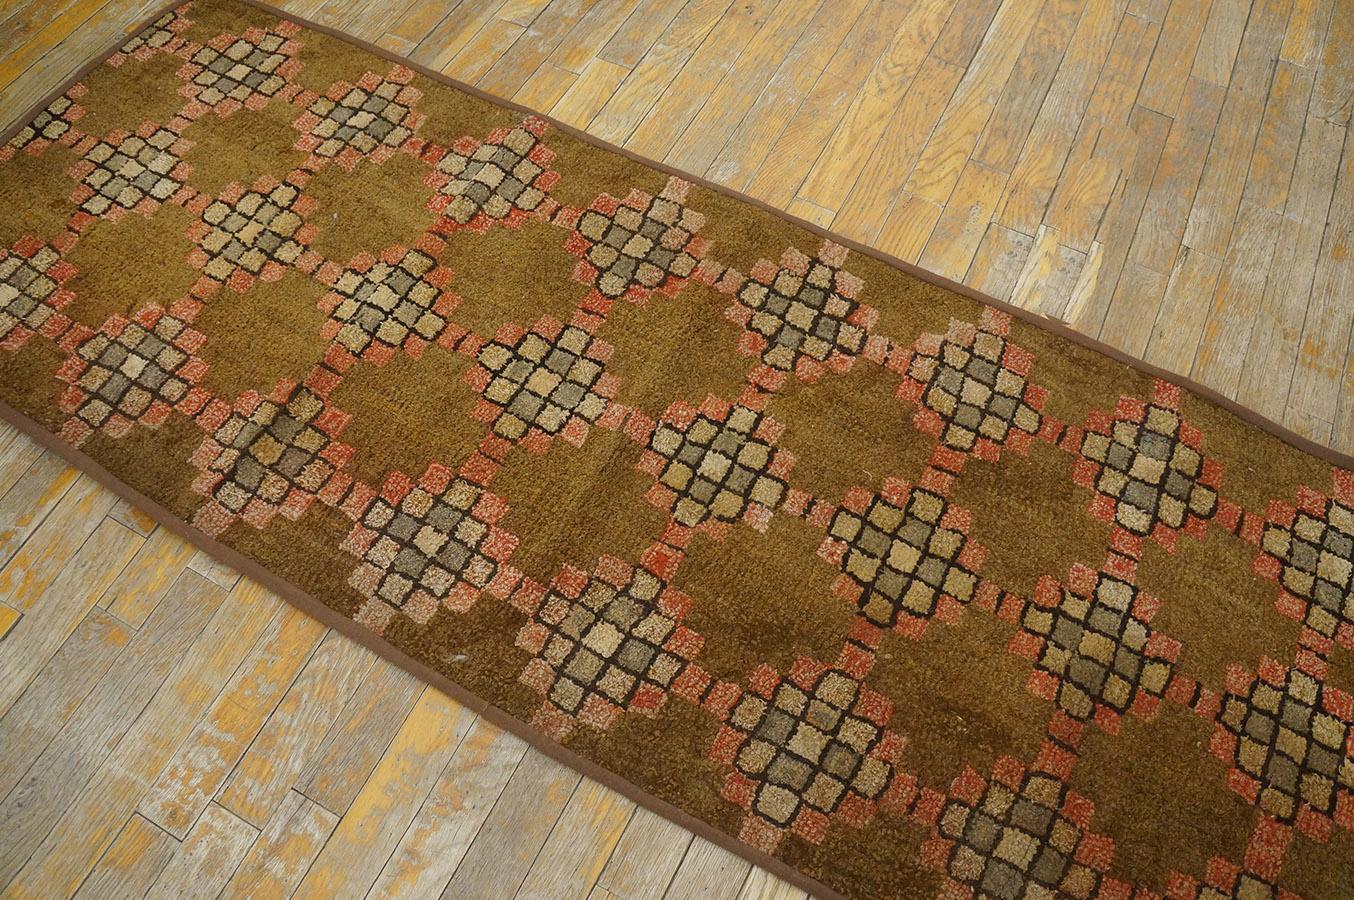 Mid 20th Century American Hooked Rug ( 2' 3'' x 6' 4'' - 68 x 193 cm ) For Sale 2